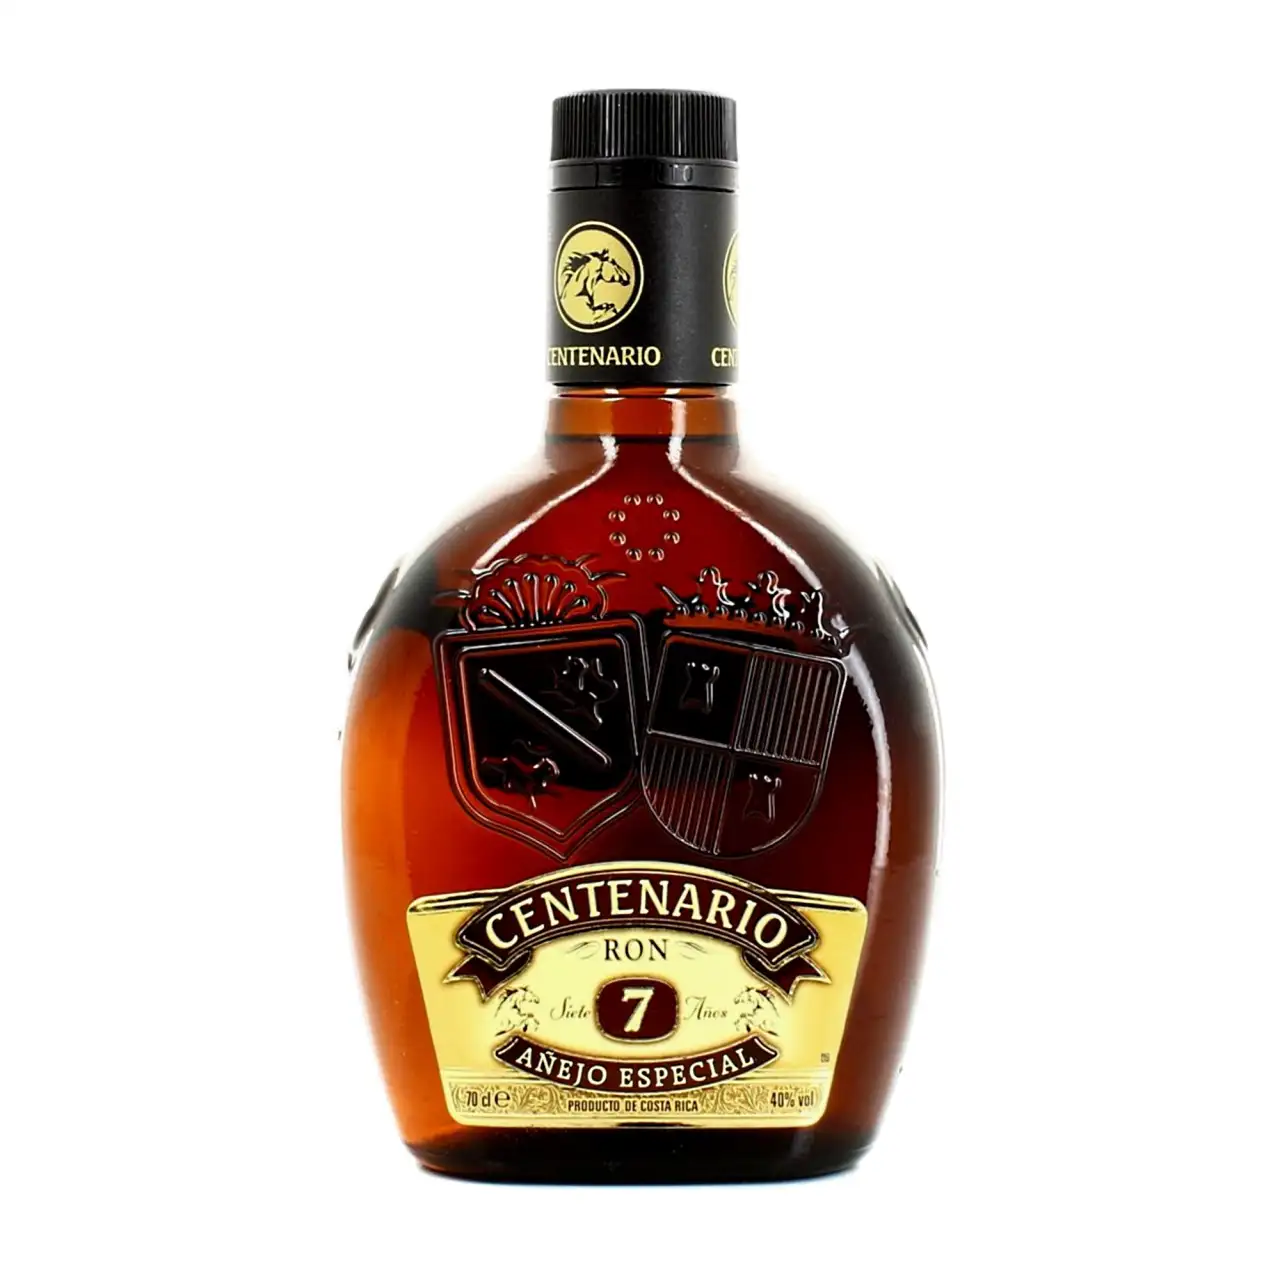 Image of the front of the bottle of the rum Centenario 7 Años Añejo Especial